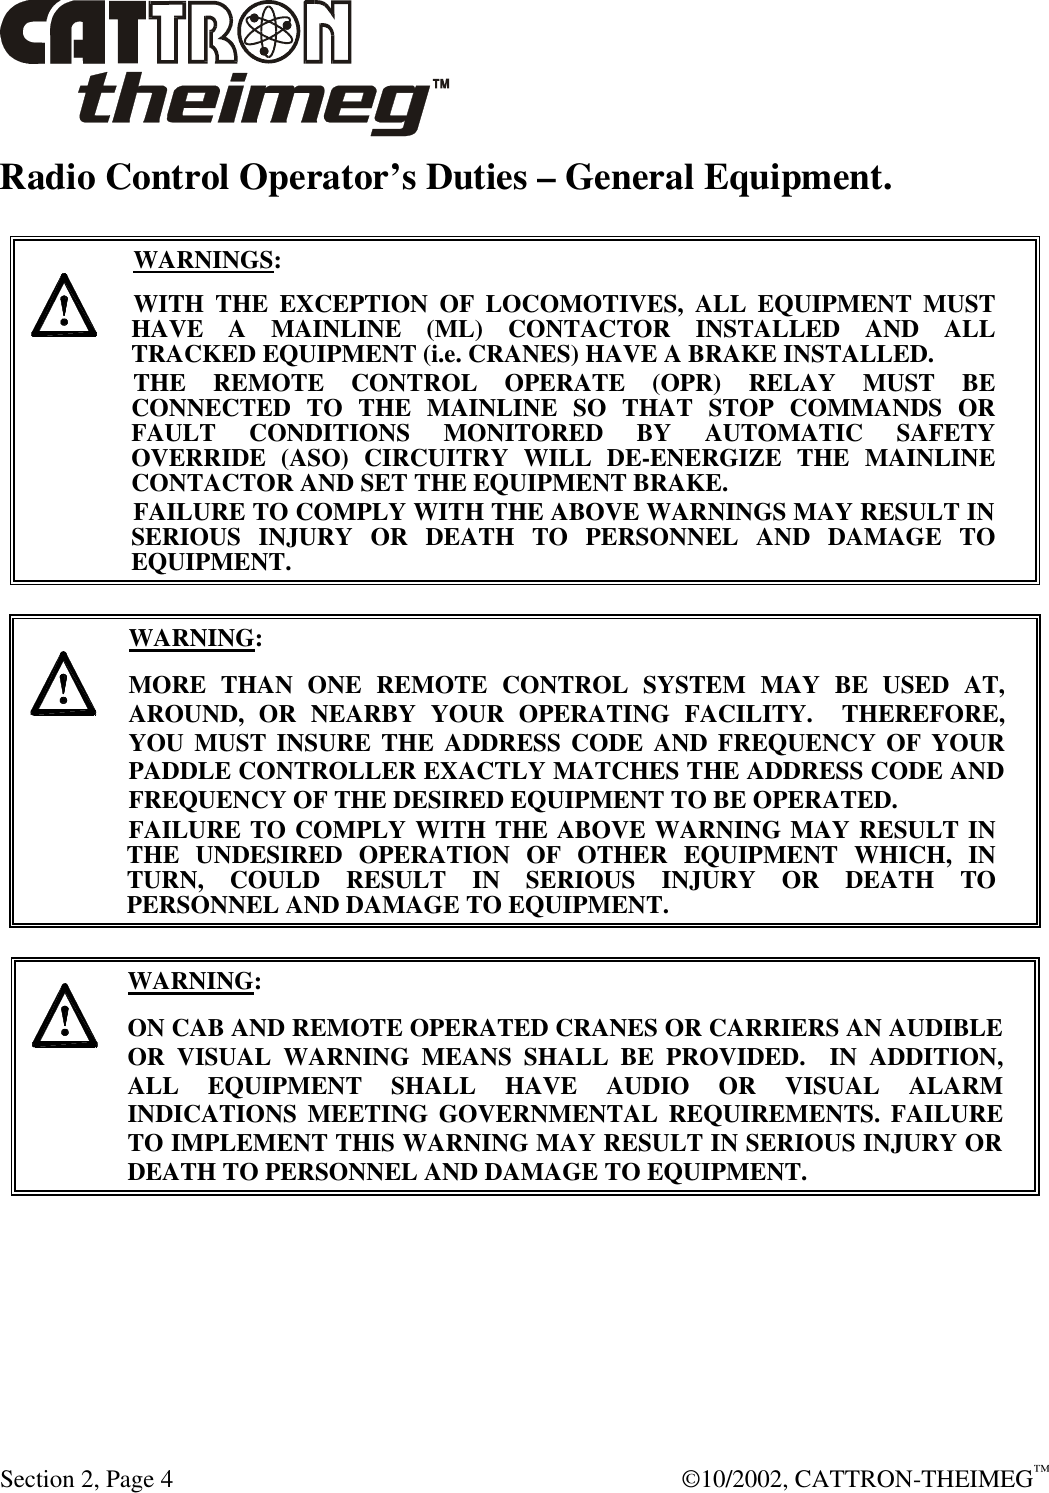  Section 2, Page 4  ©10/2002, CATTRON-THEIMEG™ Radio Control Operator’s Duties – General Equipment.      WARNINGS: WITH THE EXCEPTION OF LOCOMOTIVES, ALL EQUIPMENT MUST HAVE A MAINLINE (ML) CONTACTOR INSTALLED AND ALL TRACKED EQUIPMENT (i.e. CRANES) HAVE A BRAKE INSTALLED. THE REMOTE CONTROL OPERATE (OPR) RELAY MUST BE CONNECTED TO THE MAINLINE SO THAT STOP COMMANDS OR FAULT CONDITIONS MONITORED BY AUTOMATIC SAFETY OVERRIDE (ASO) CIRCUITRY WILL DE-ENERGIZE THE MAINLINE CONTACTOR AND SET THE EQUIPMENT BRAKE.  FAILURE TO COMPLY WITH THE ABOVE WARNINGS MAY RESULT IN SERIOUS INJURY OR DEATH TO PERSONNEL AND DAMAGE TO EQUIPMENT.       WARNING: MORE THAN ONE REMOTE CONTROL SYSTEM MAY BE USED AT, AROUND, OR NEARBY YOUR OPERATING FACILITY.  THEREFORE, YOU MUST INSURE THE ADDRESS CODE AND FREQUENCY OF YOUR PADDLE CONTROLLER EXACTLY MATCHES THE ADDRESS CODE AND FREQUENCY OF THE DESIRED EQUIPMENT TO BE OPERATED. FAILURE TO COMPLY WITH THE ABOVE WARNING MAY RESULT IN THE UNDESIRED OPERATION OF OTHER EQUIPMENT WHICH, IN TURN, COULD RESULT IN SERIOUS INJURY OR DEATH TO PERSONNEL AND DAMAGE TO EQUIPMENT.       WARNING: ON CAB AND REMOTE OPERATED CRANES OR CARRIERS AN AUDIBLE OR VISUAL WARNING MEANS SHALL BE PROVIDED.  IN ADDITION, ALL EQUIPMENT SHALL HAVE AUDIO OR VISUAL ALARM INDICATIONS MEETING GOVERNMENTAL REQUIREMENTS. FAILURE TO IMPLEMENT THIS WARNING MAY RESULT IN SERIOUS INJURY OR DEATH TO PERSONNEL AND DAMAGE TO EQUIPMENT.  